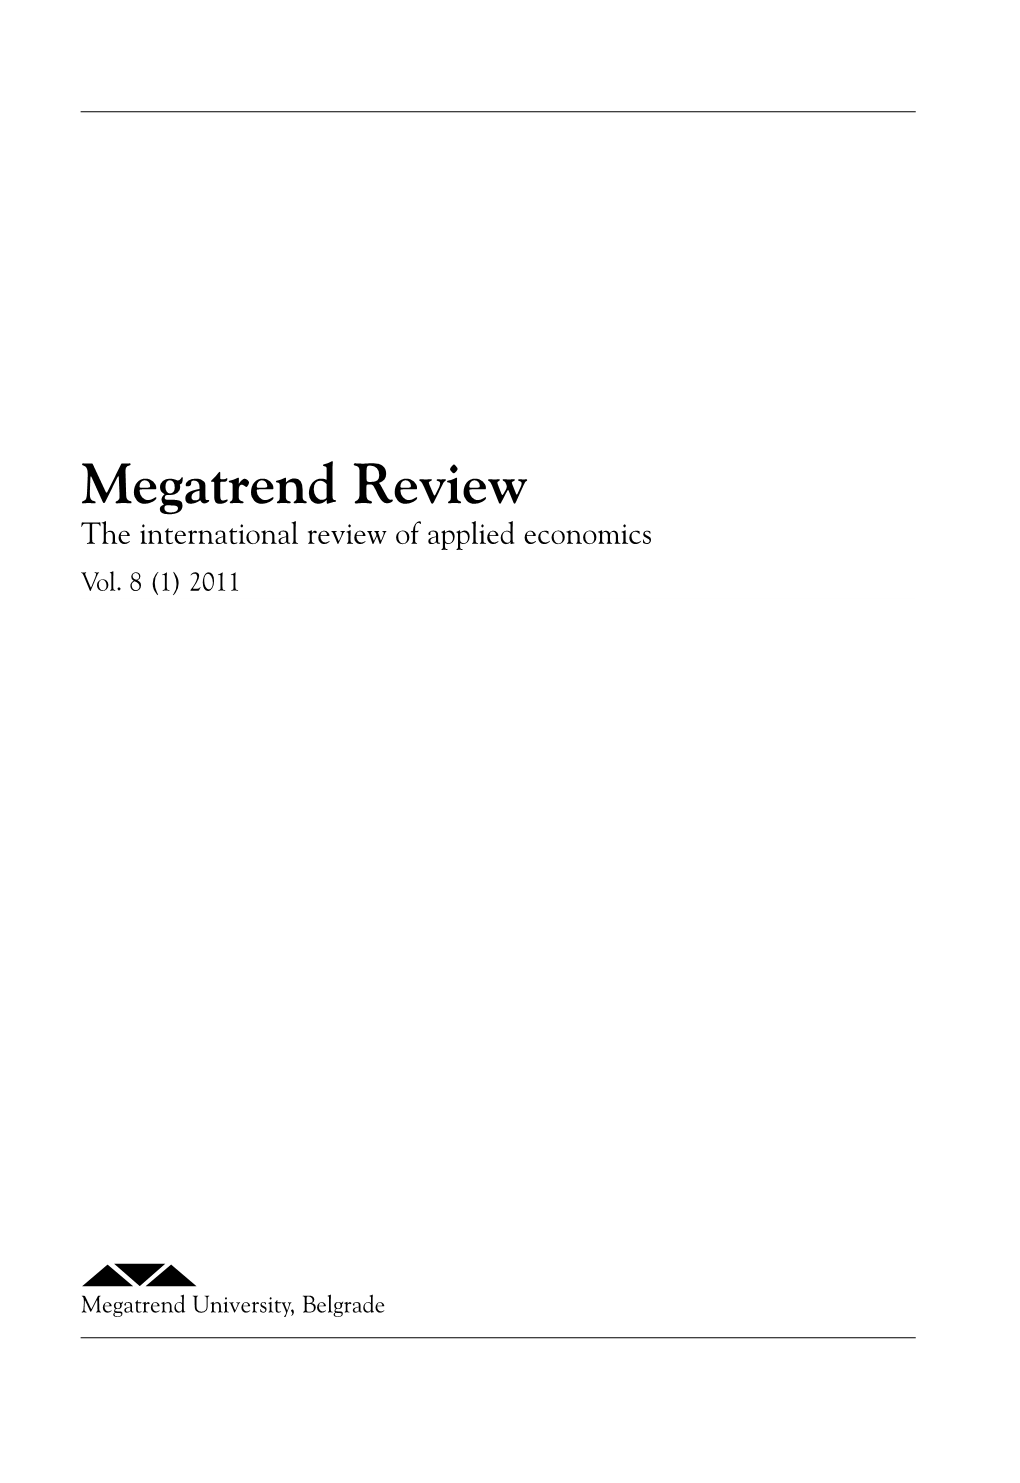 Megatrend Review the International Review of Applied Economics Vol